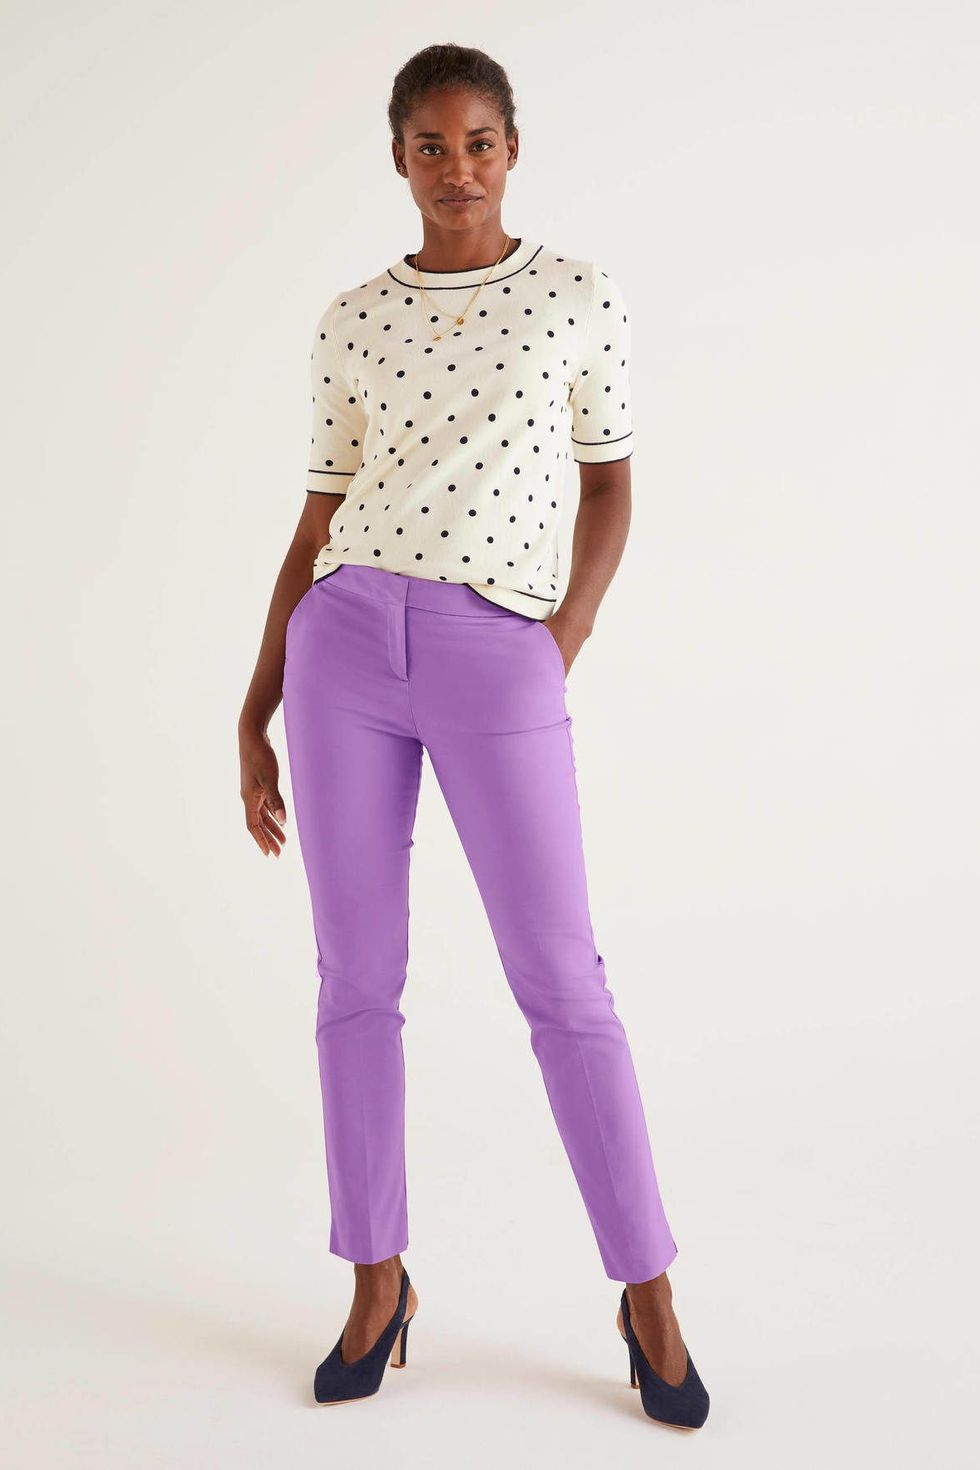 The must-have Boden trousers you'll want to wear all spring